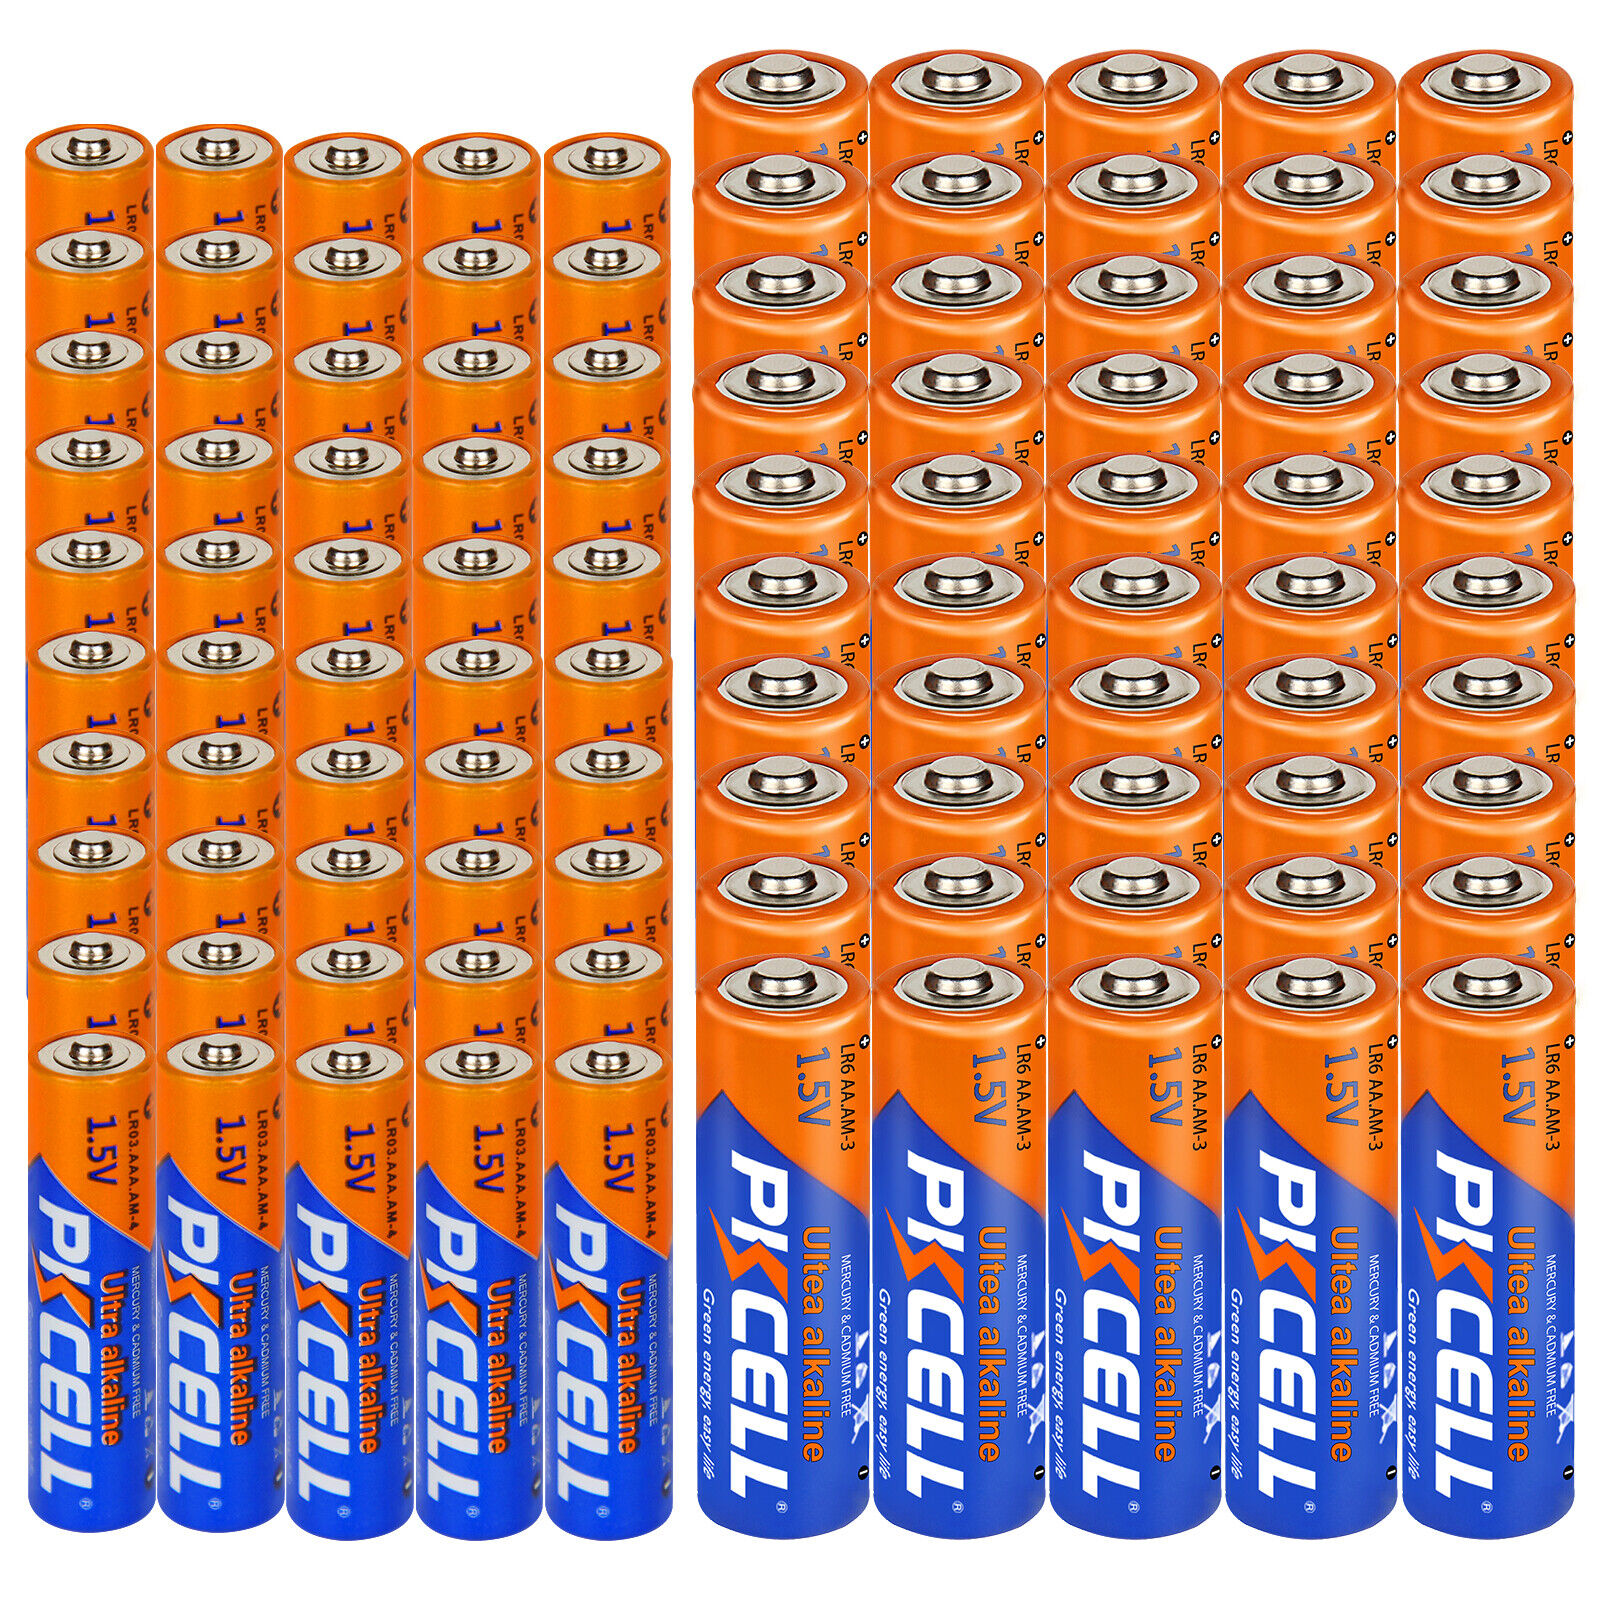 50x AA & 50x AAA Alkaline AA/AAA Batteries 1.5V LR6 MN1500 LR03 MN2400 for Light PKCELL Does Not Apply